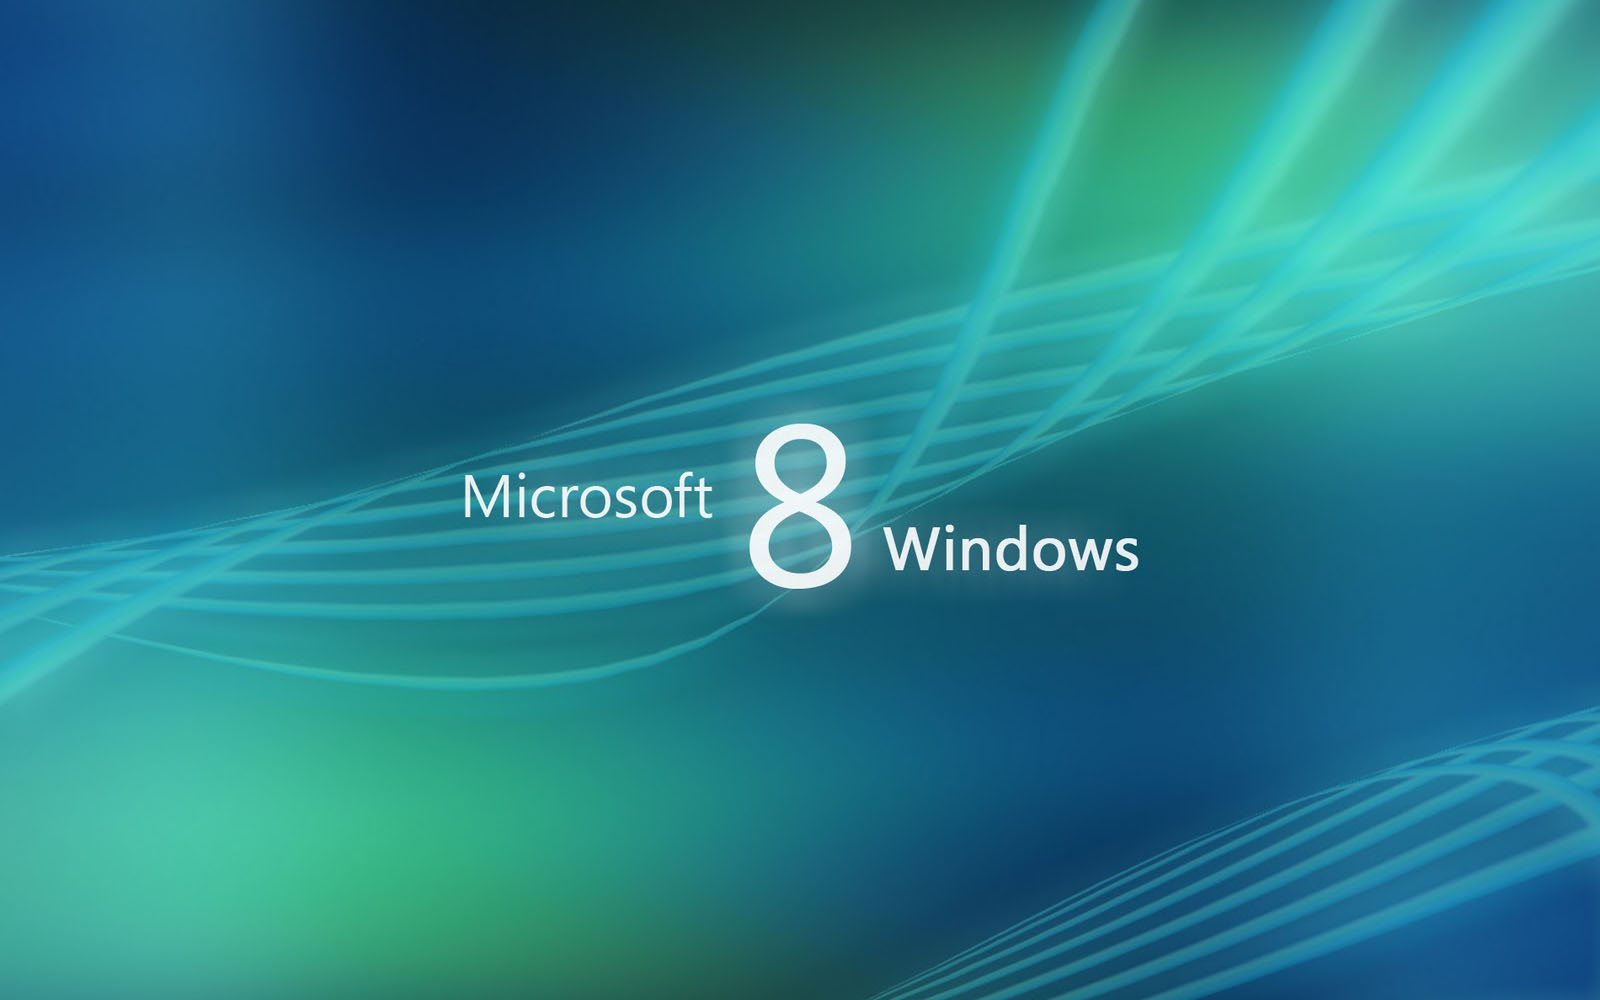  Themes Free Windows 8 Background Wallpapers Windows 8 Background